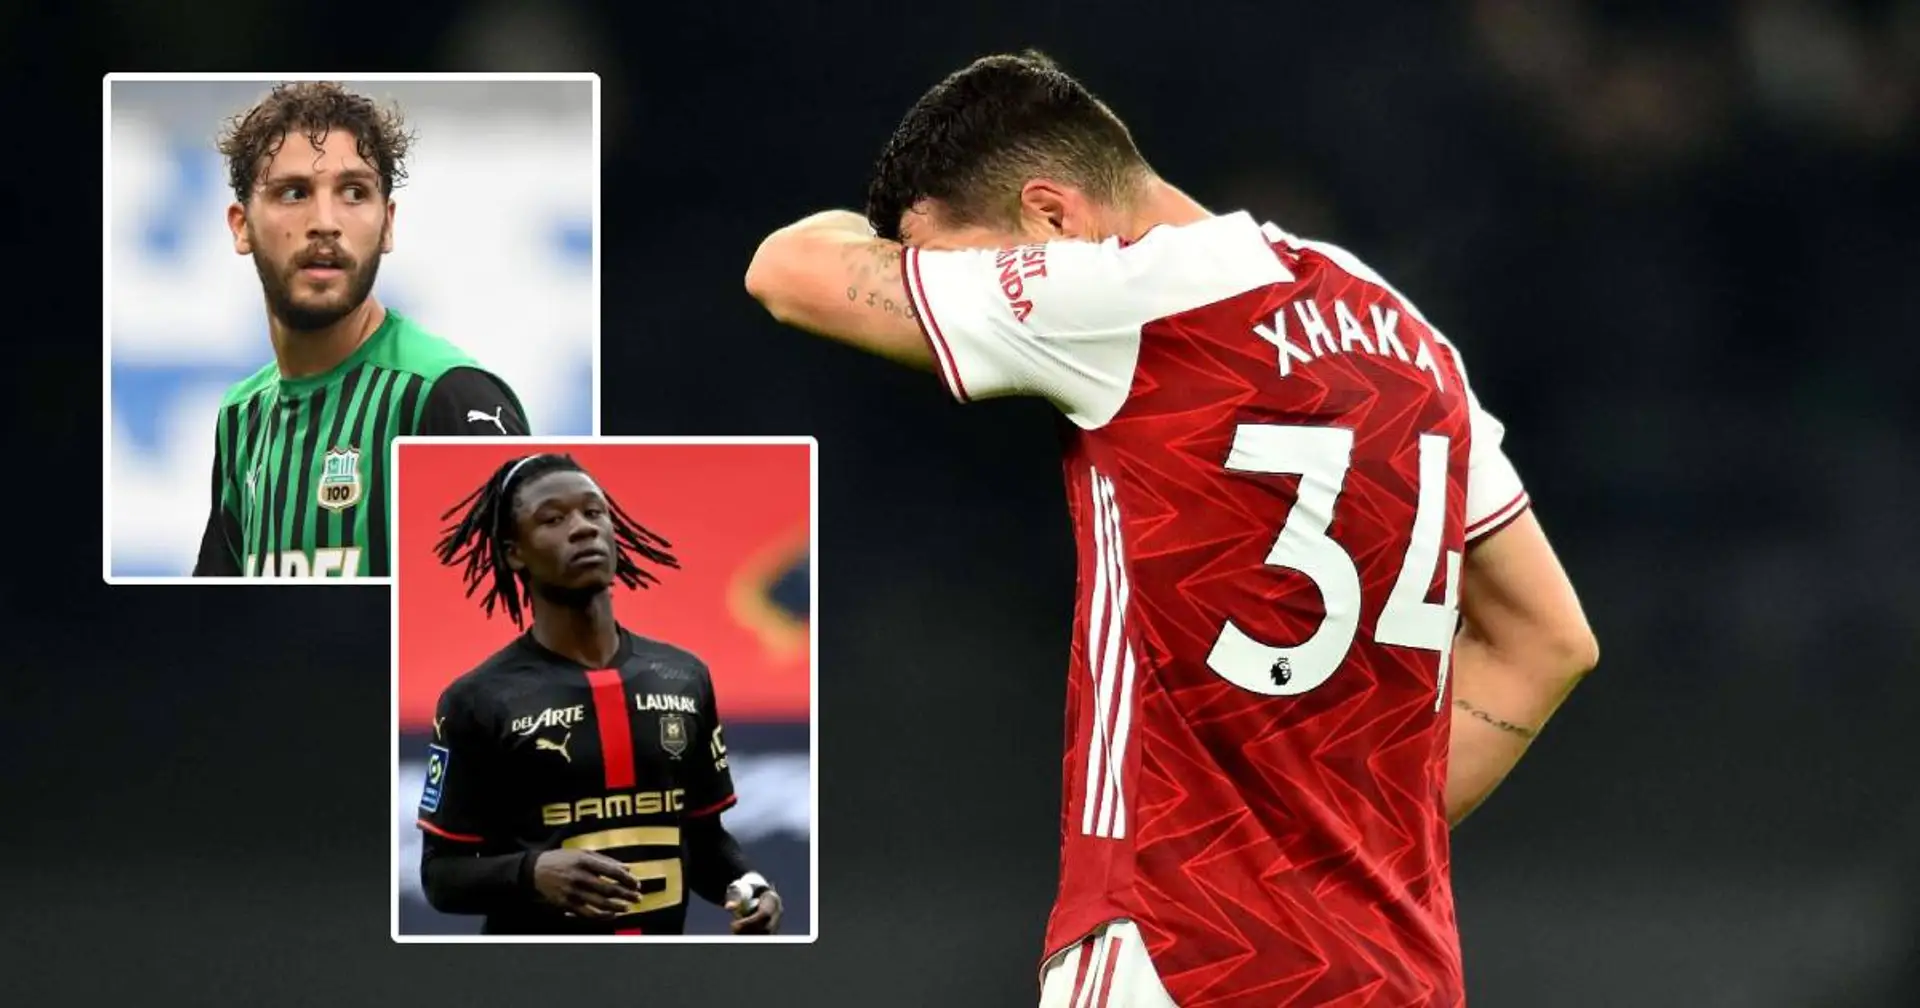 Fan explains why Xhaka is necessary to replace, names 3 potential candidates, none of them Neves